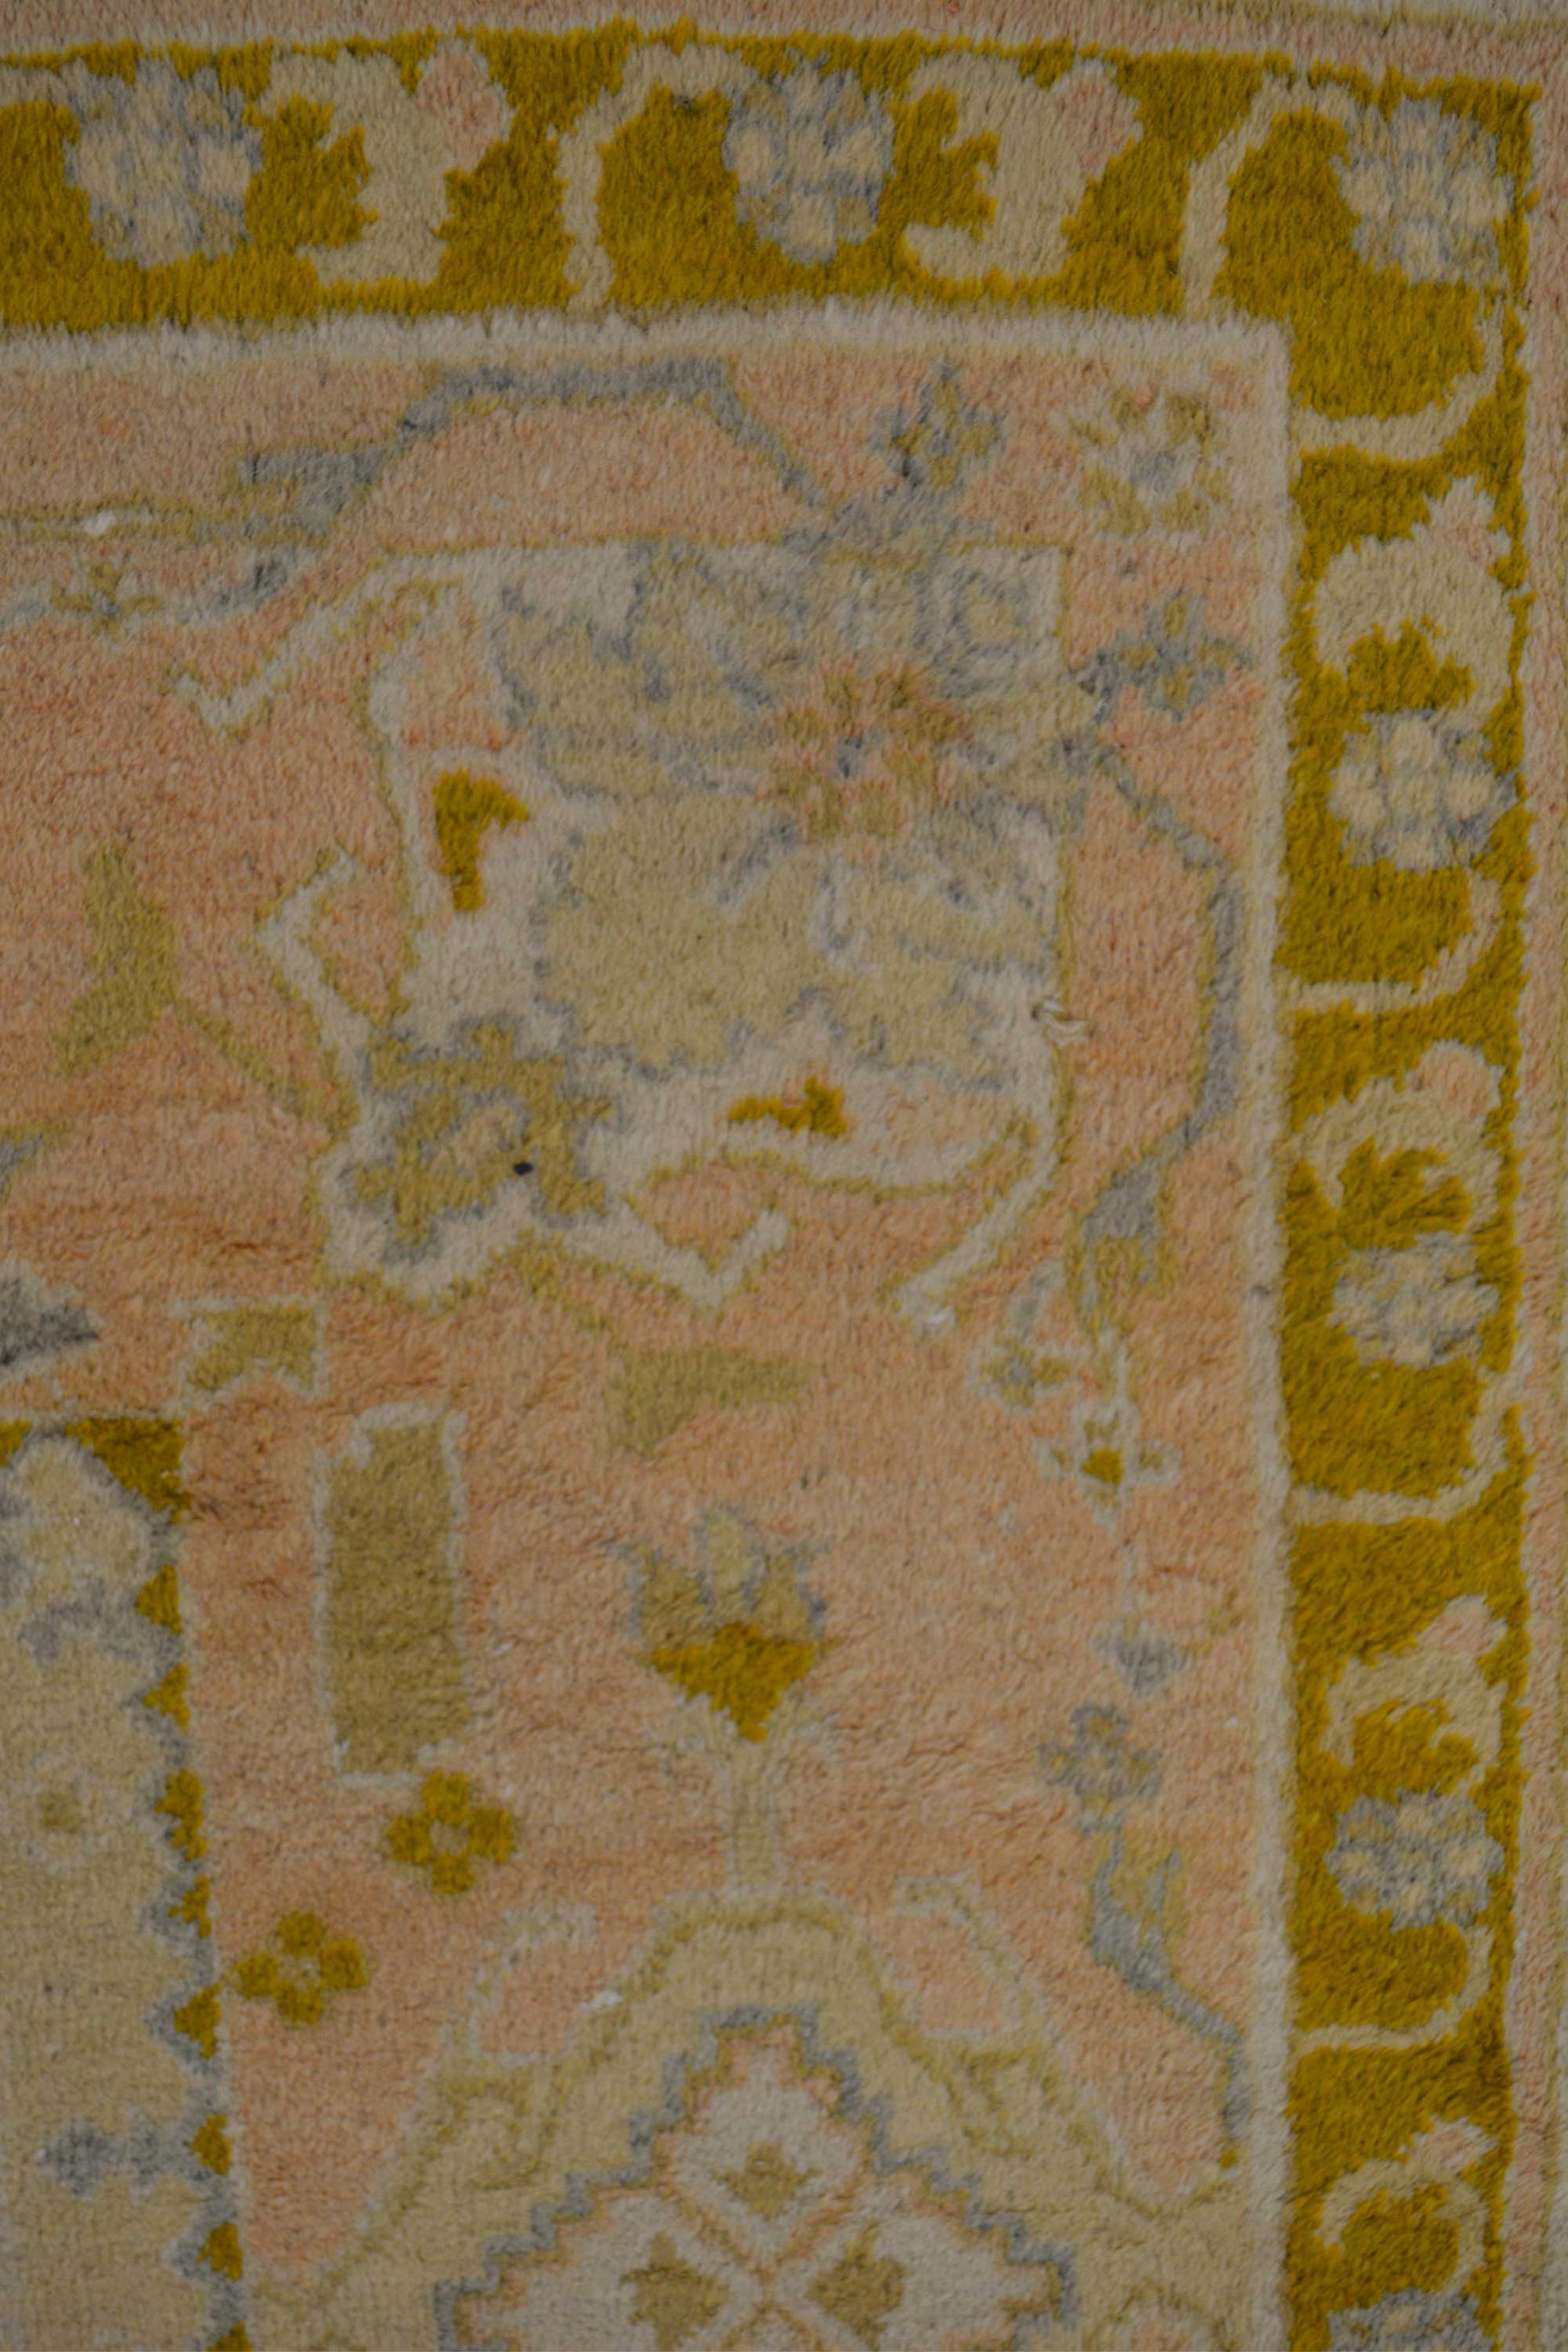 After that, this beautiful rug has a border in a copper color followed by a thicker frame that is a shade of dusty pink.